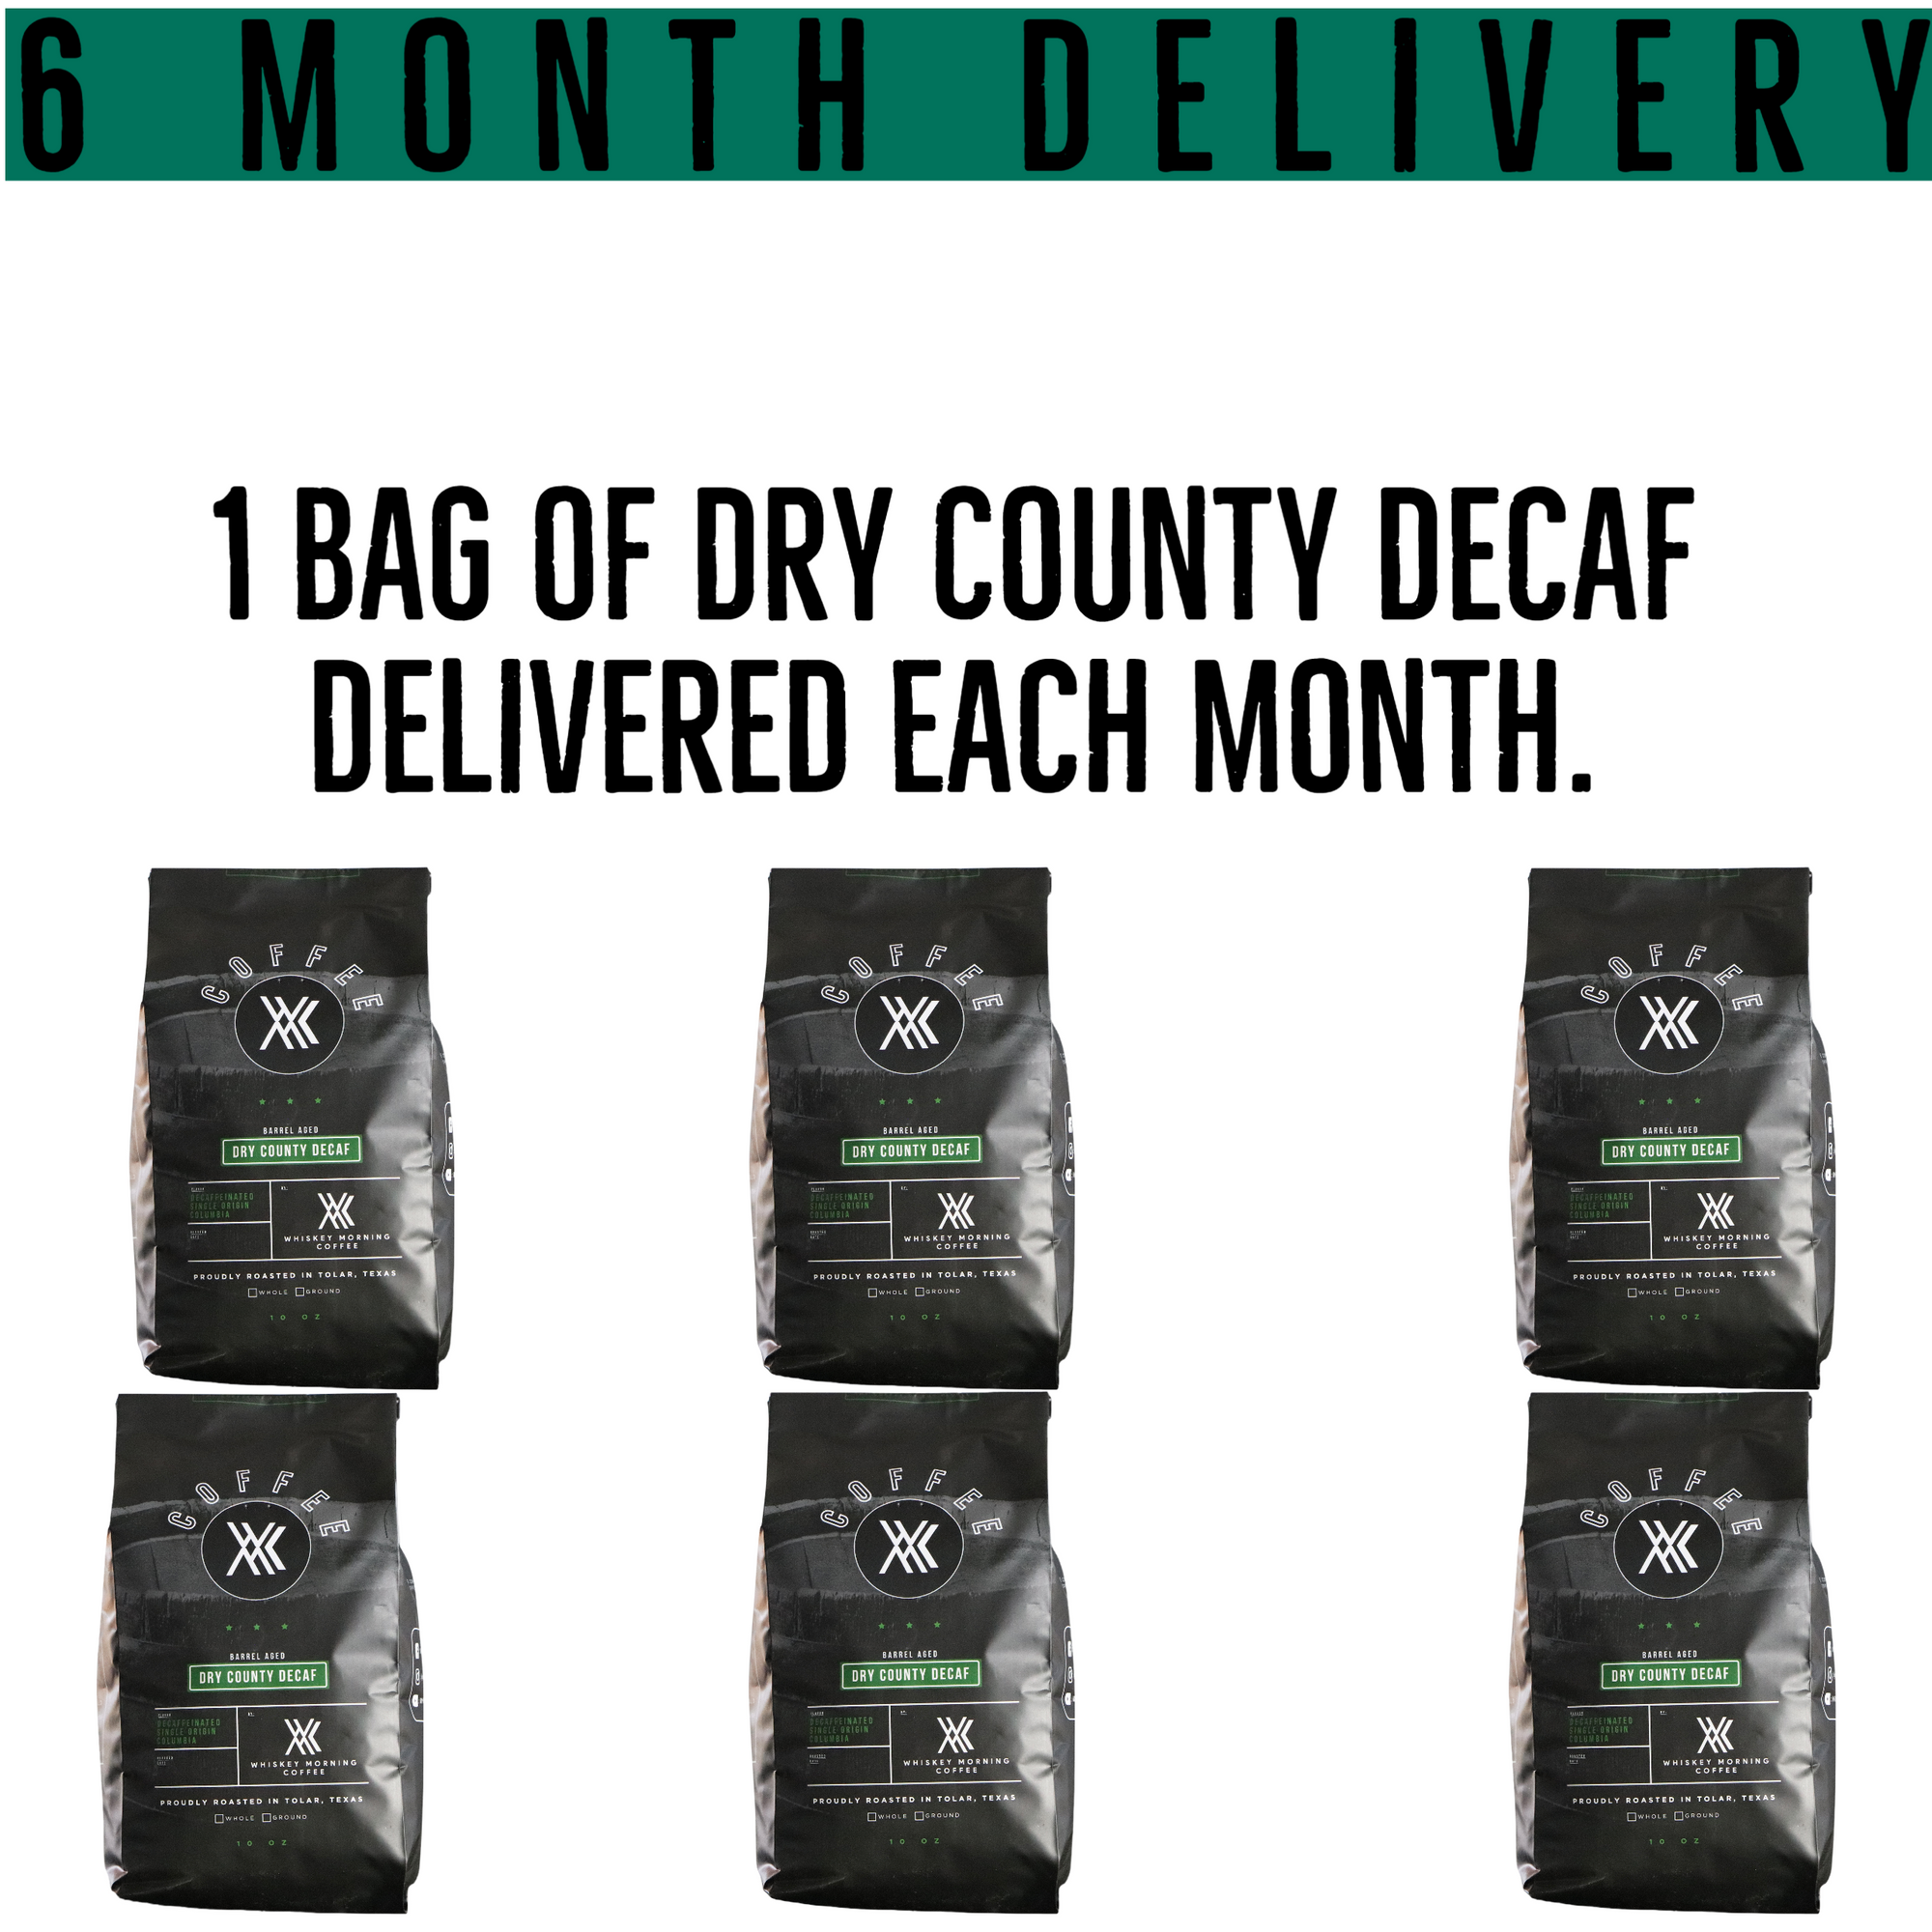 Dry County Decaf 6 month prepaid subscription